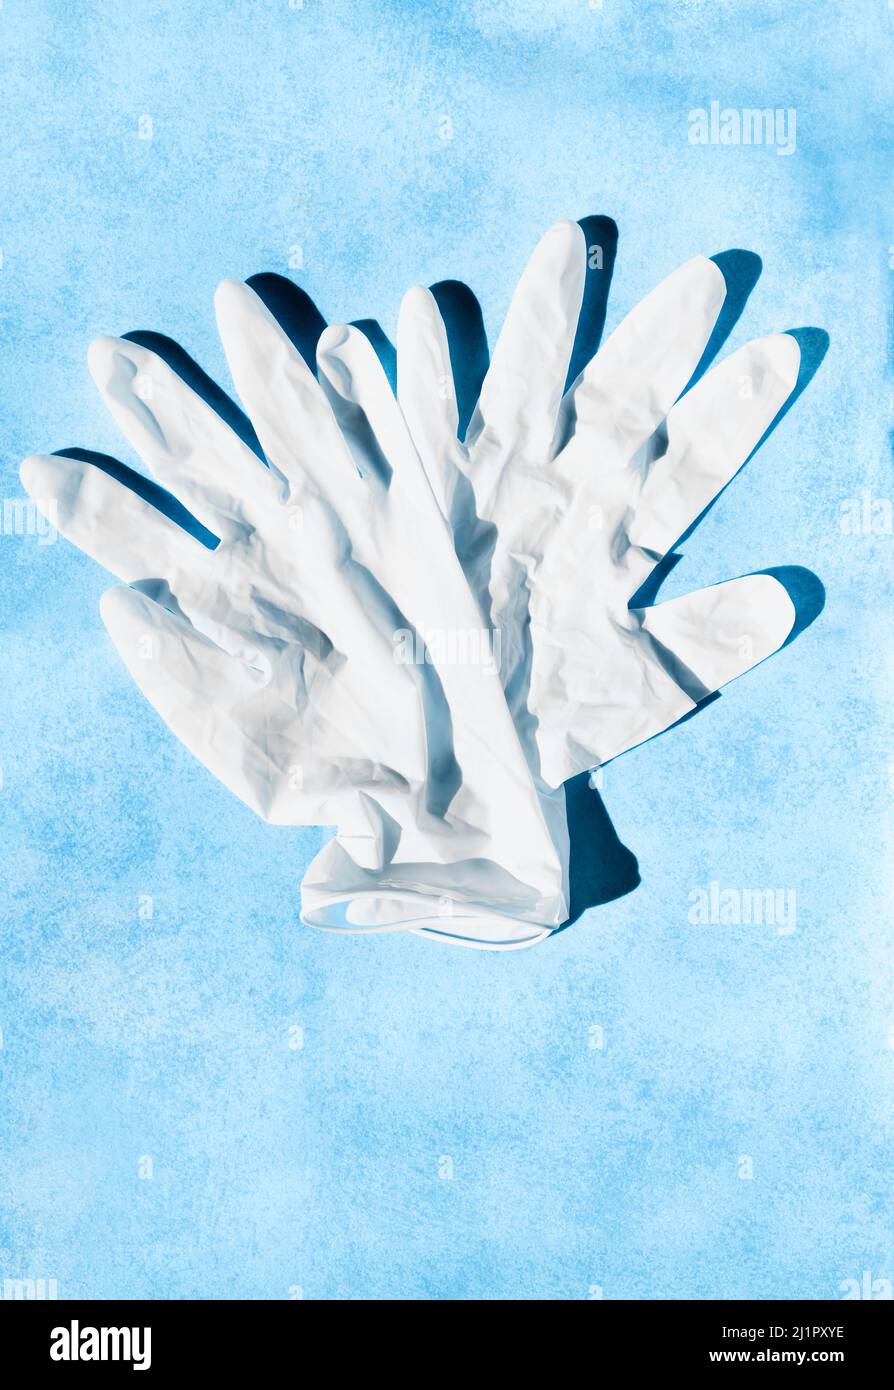 Pair of white surgical glove on blue background , health care and medicine Stock Photo